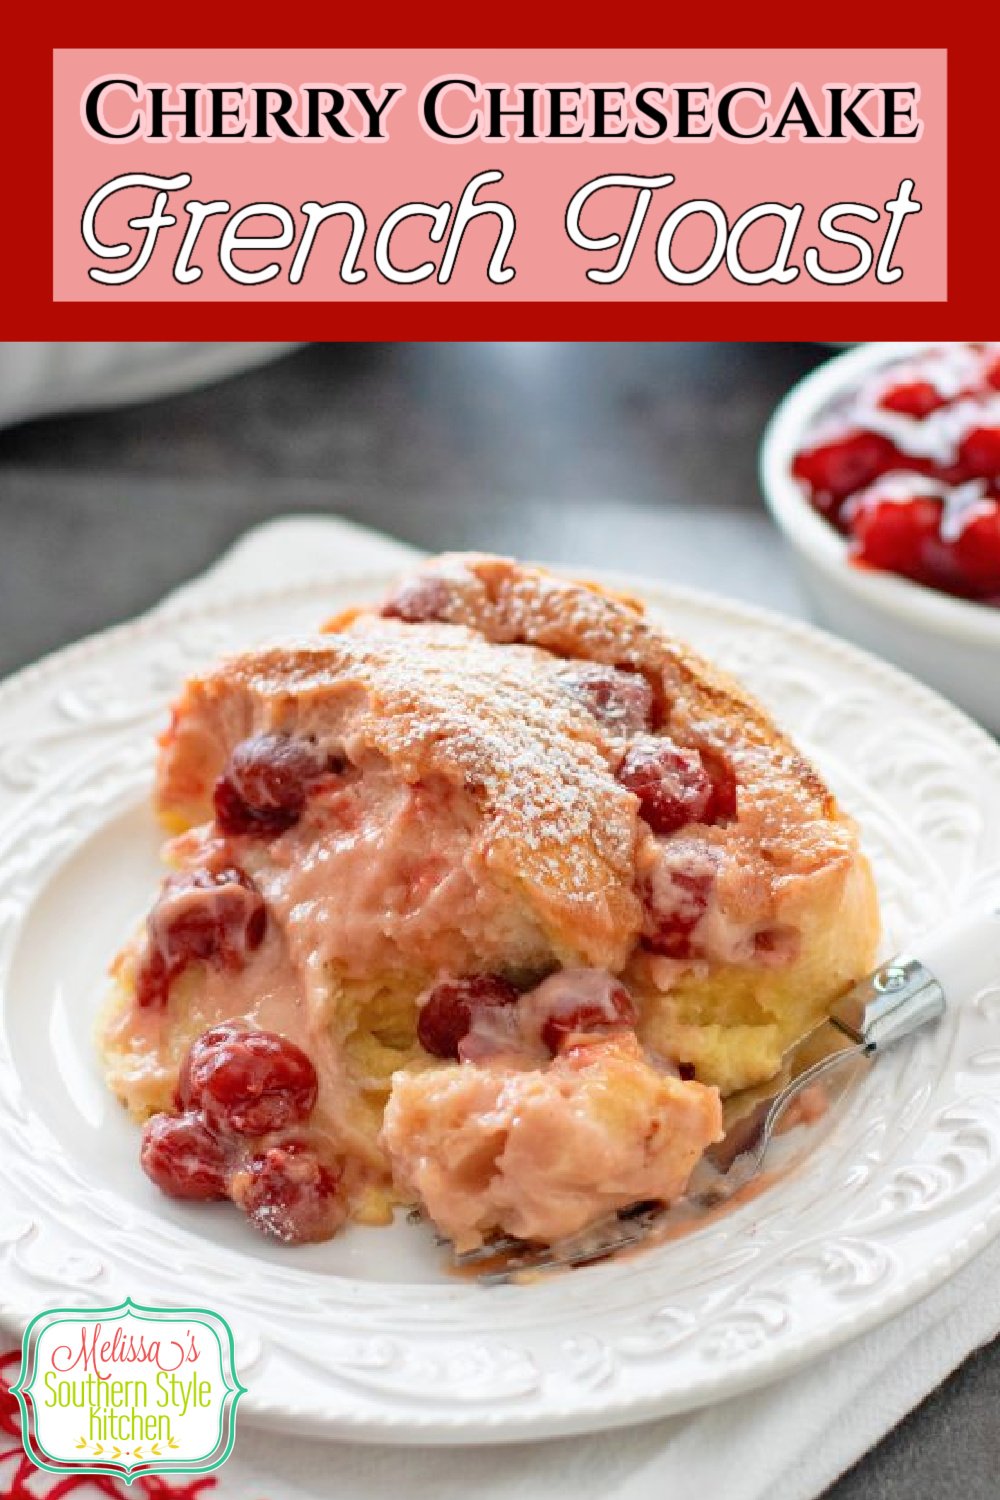 This delectable Cherry Cheesecake French Toast recipe is an indulgent fusion dish combining french toast with a cherry cheesecake filling #frenchtoast #cherrycheesecake #frenchtoastrecipes #stuffedfrenchtoast #mothersdaybrunch #brunchrecipes #cheesecake #cherrydesserts via @melissasssk